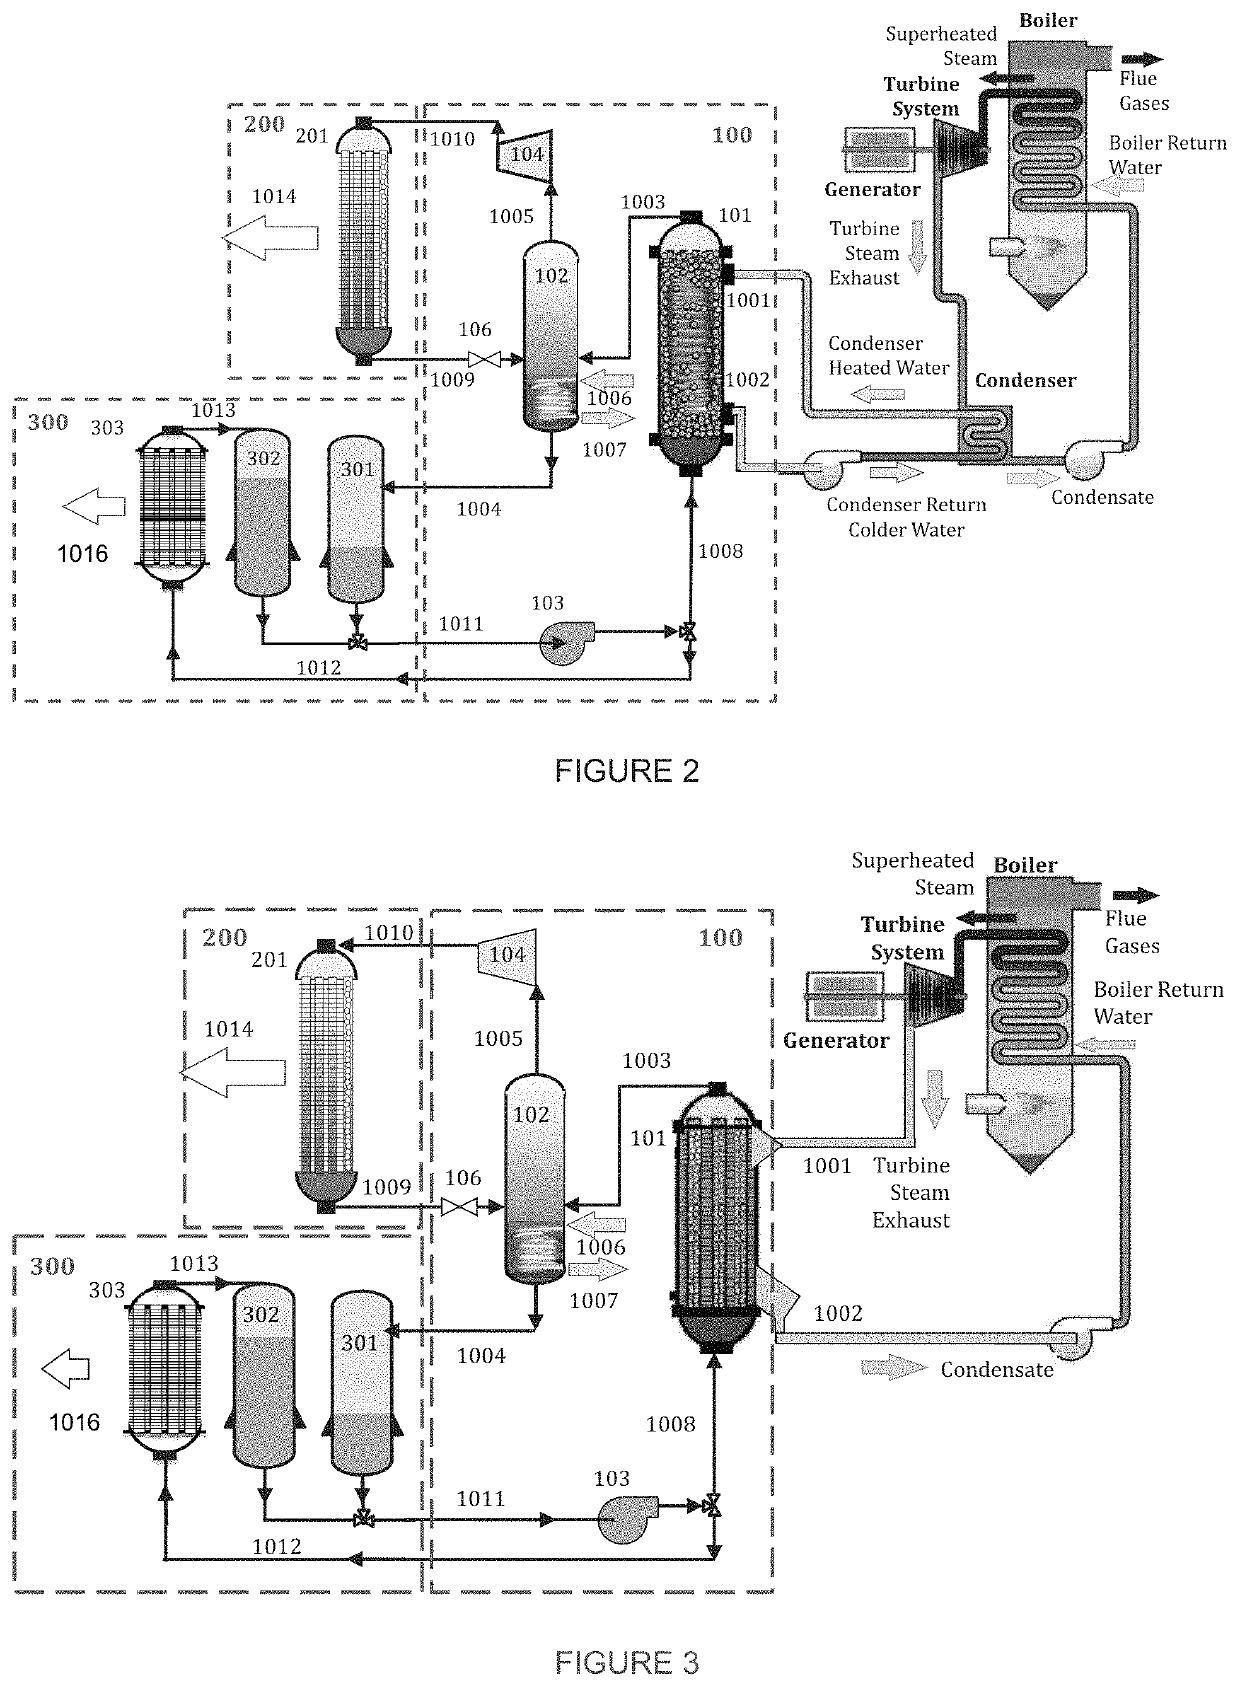 Dry cooling systems using thermally induced polymerization